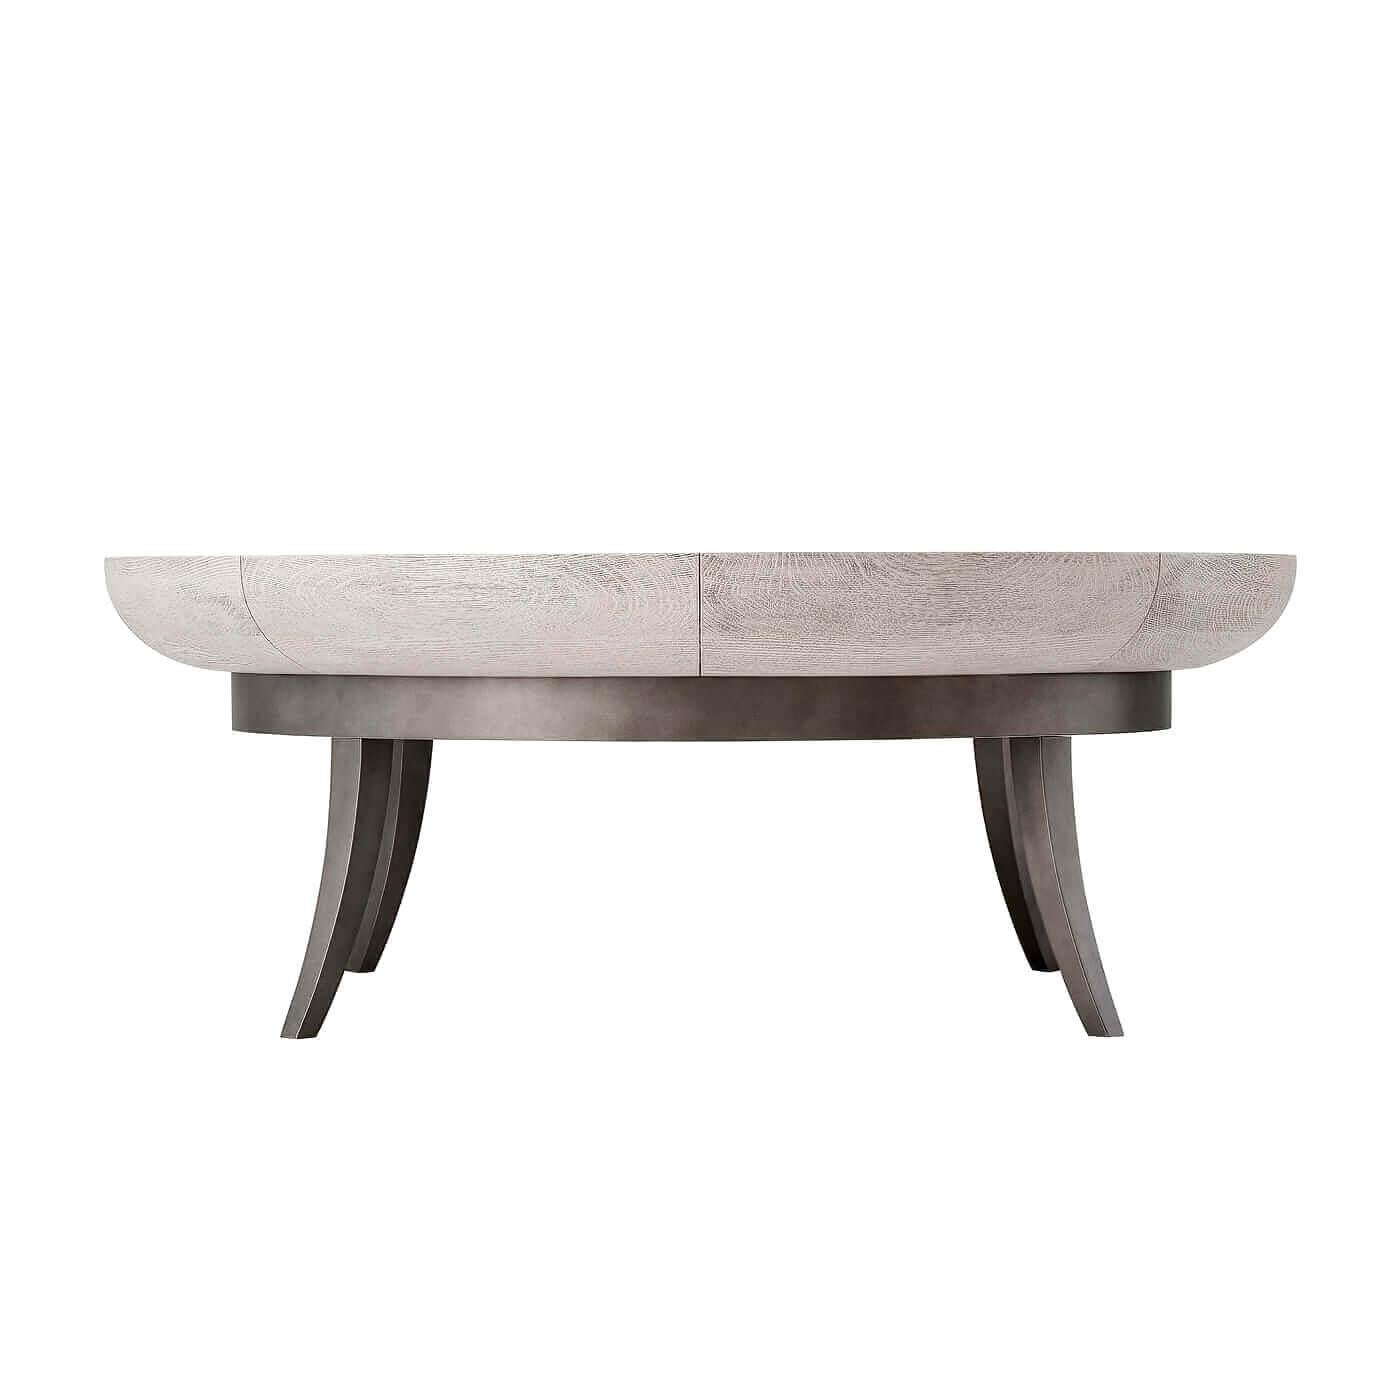 A rimmed bowl top coffee table with splayed sabre legs. This table has a beautiful circular rimmed bowl top in a 